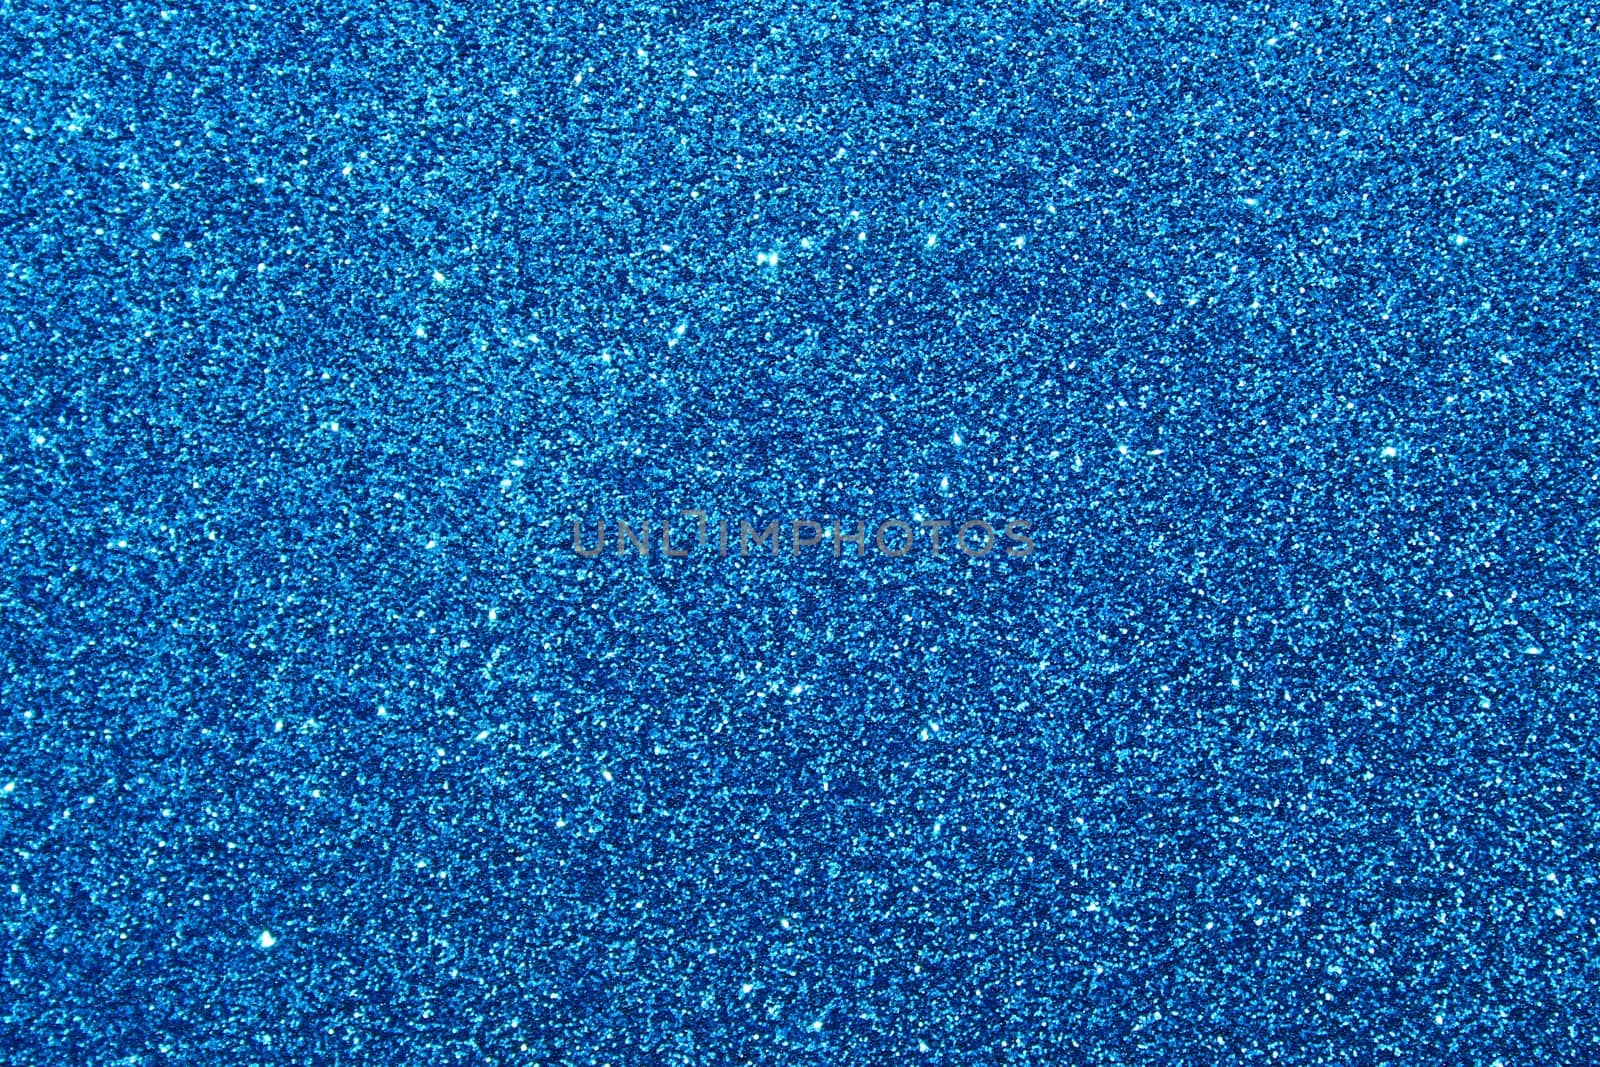 The picture shows a background with blue glittery paper